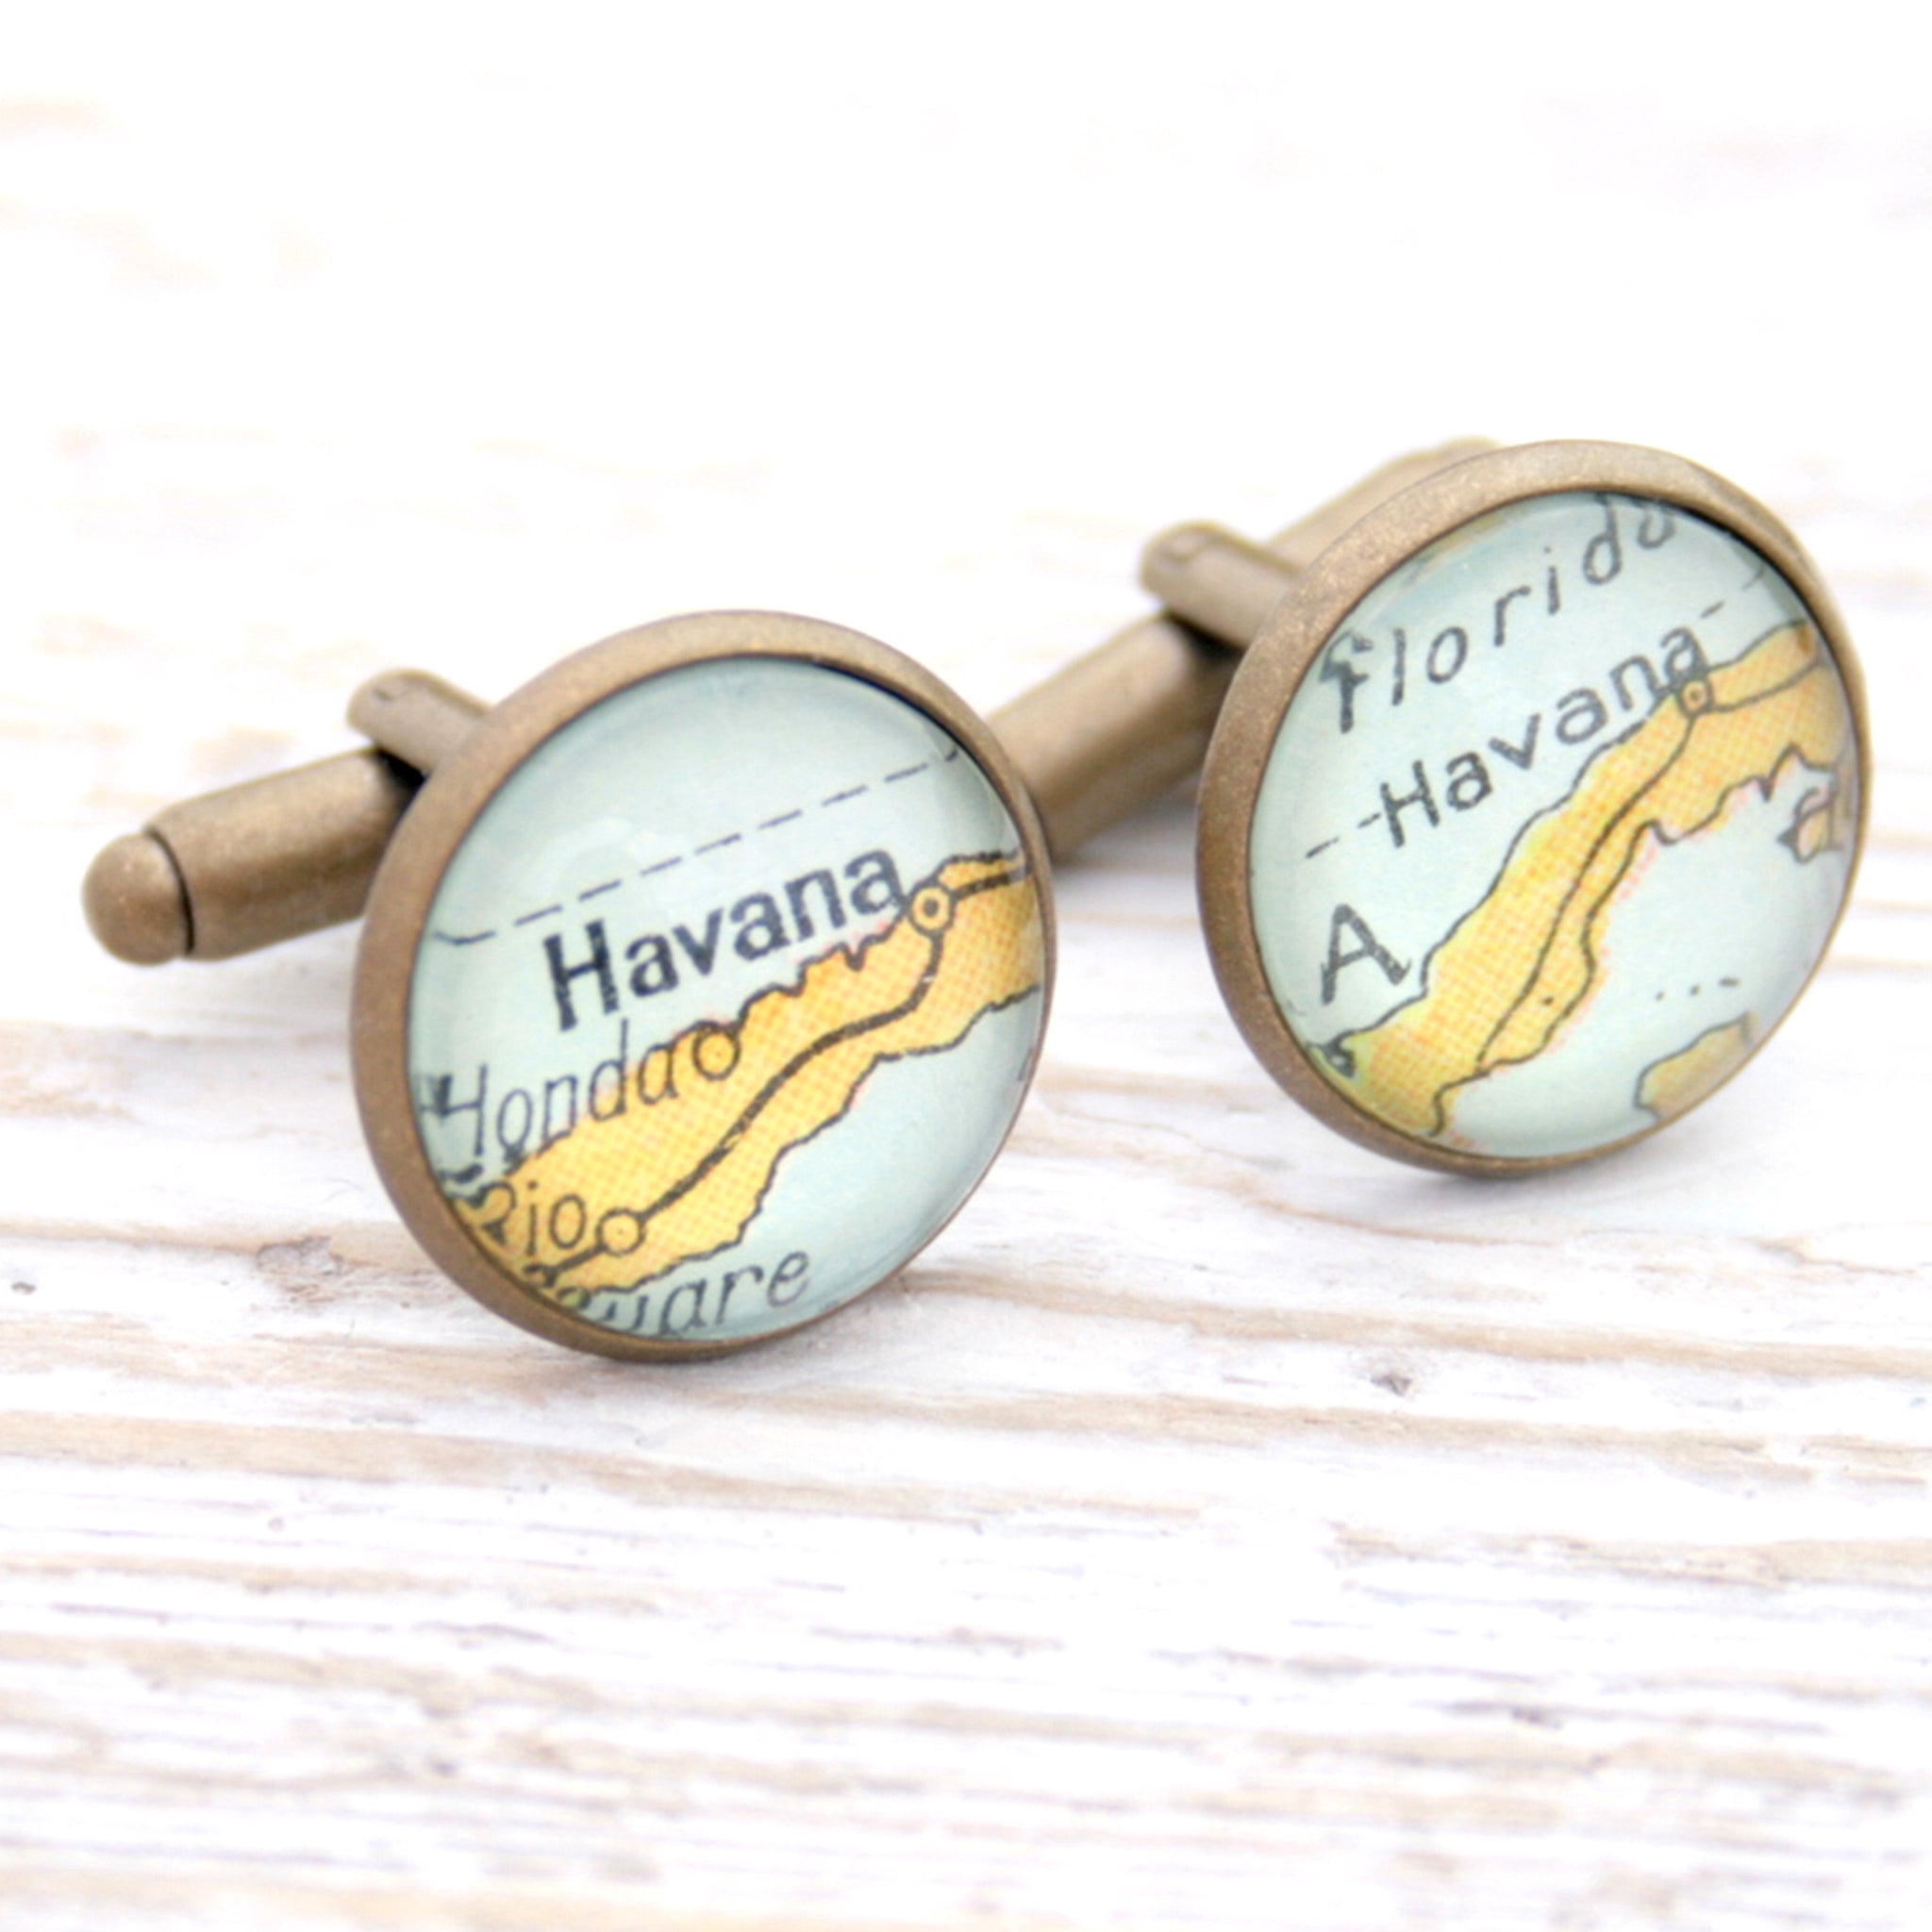 Personalised map cufflinks in antique bronze color featuring maps of Havana